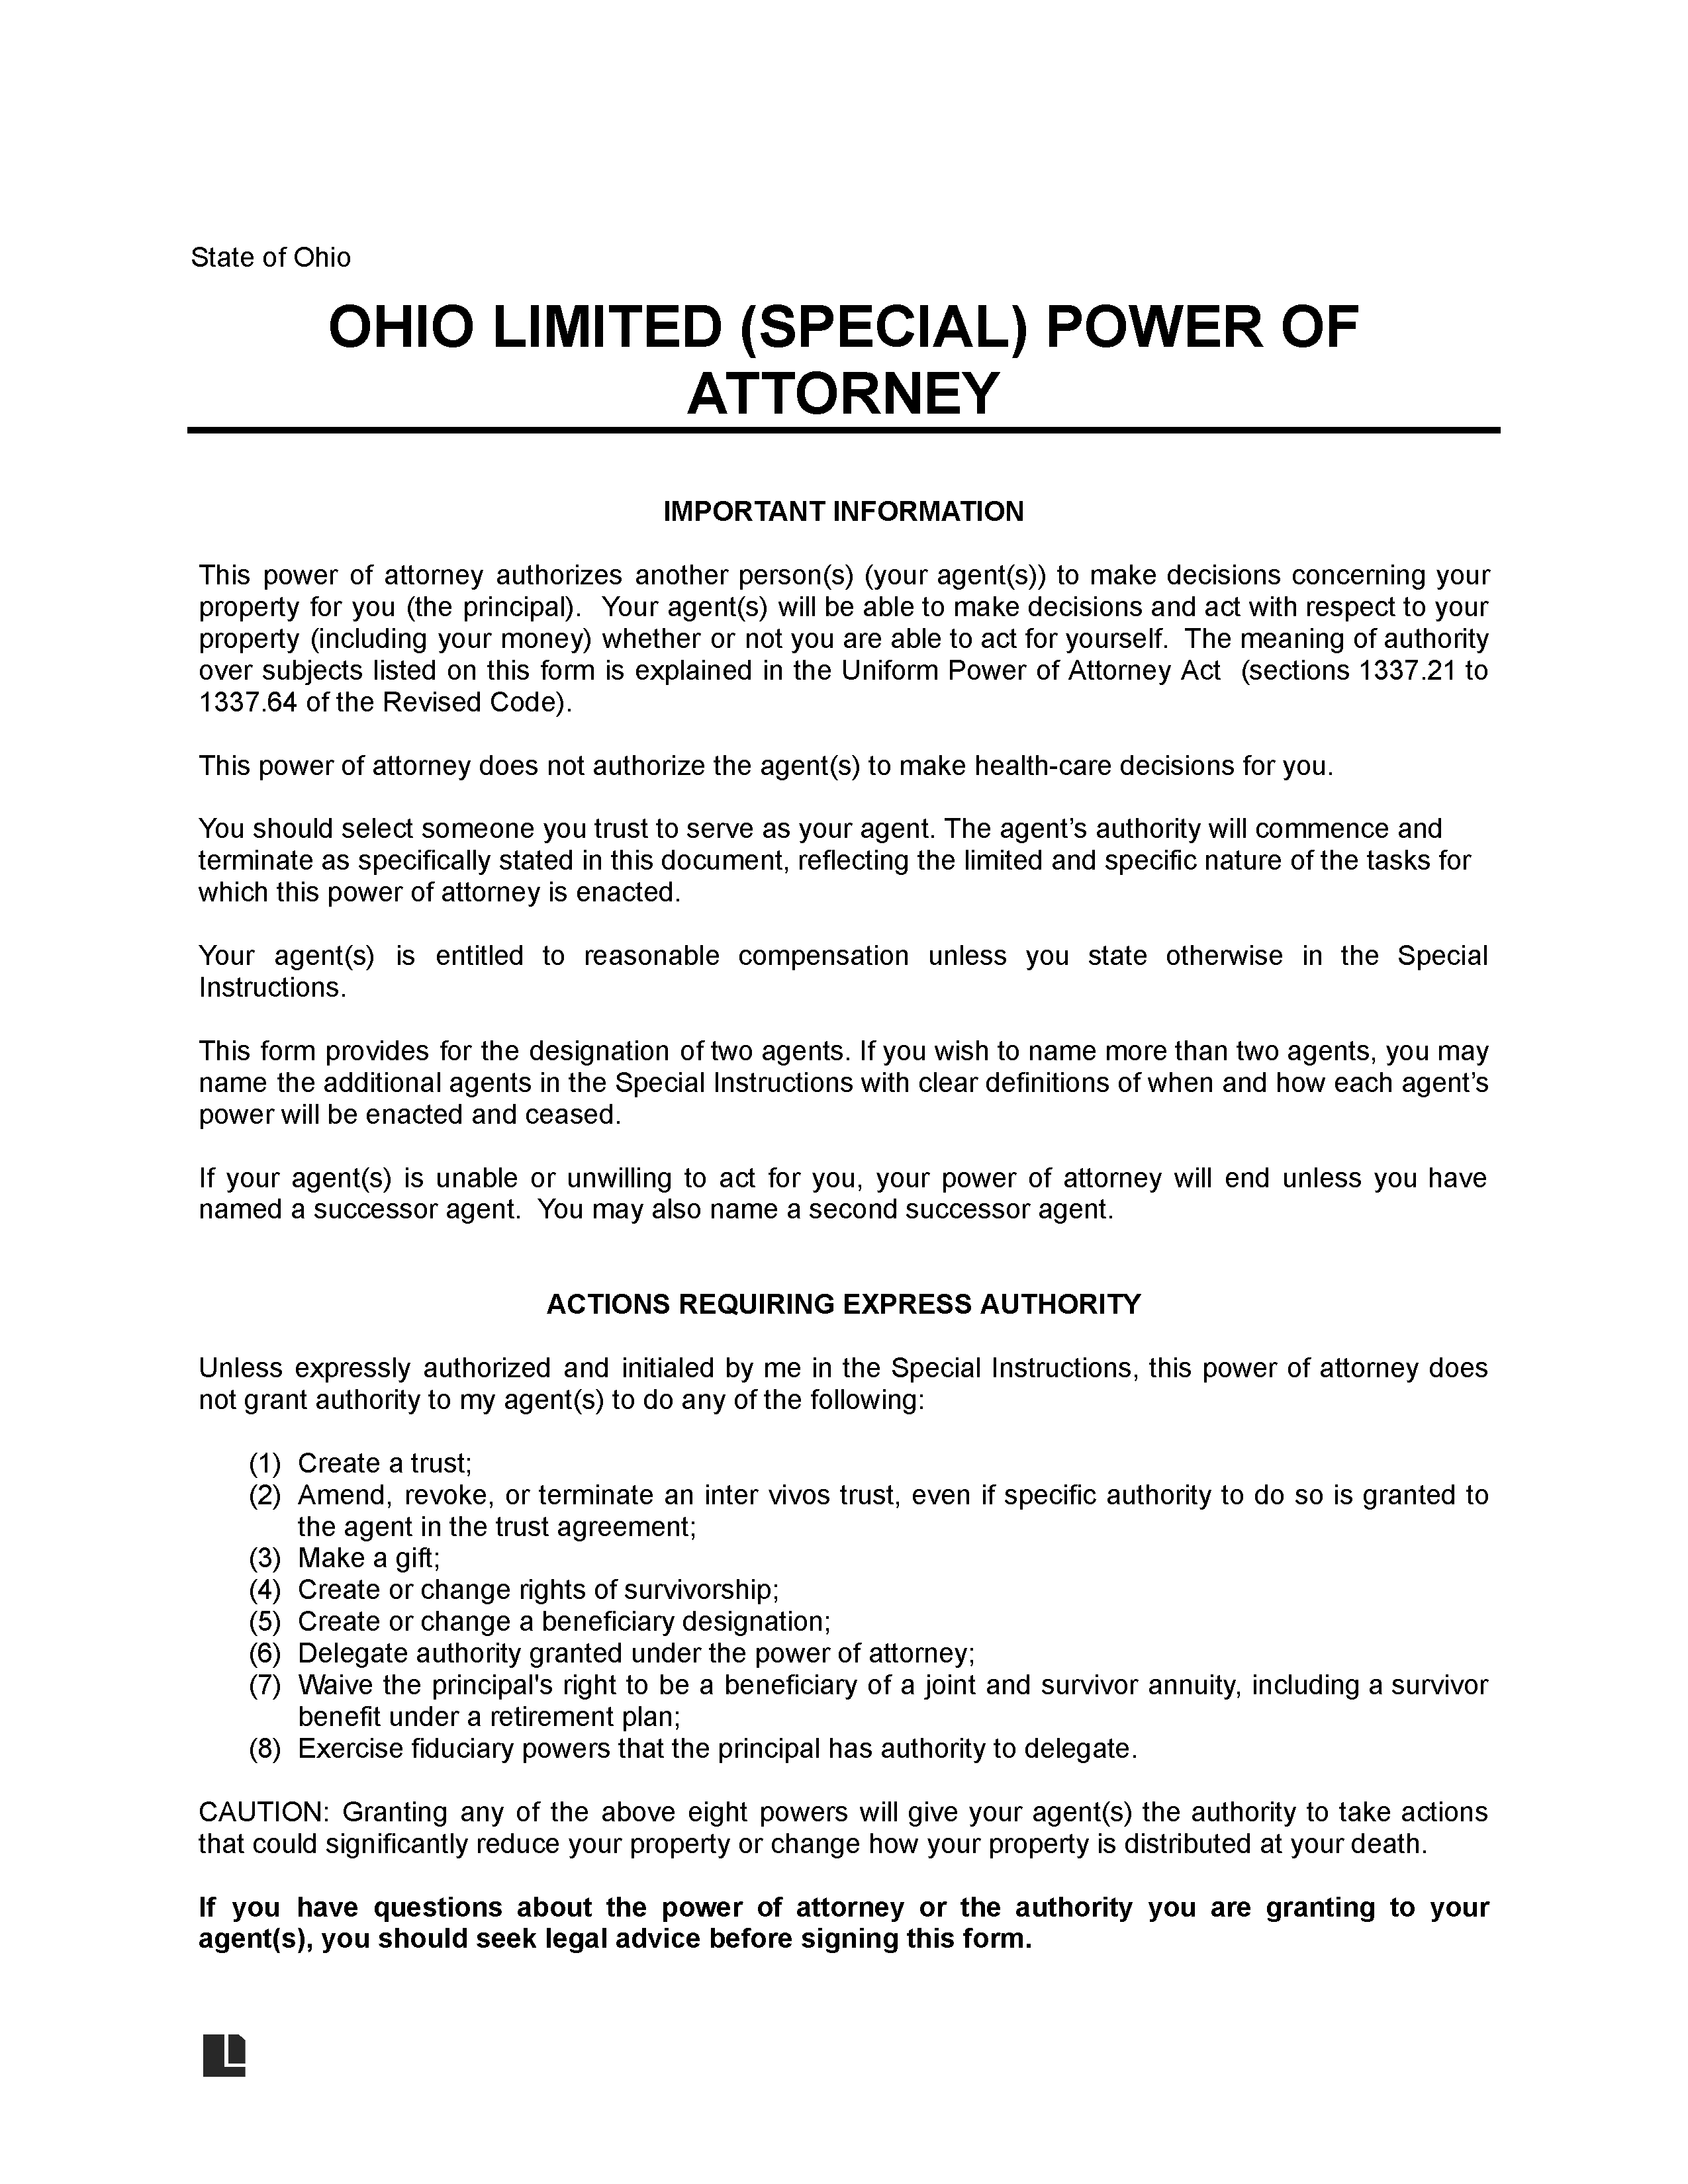 Ohio Limited Power of Attorney Template